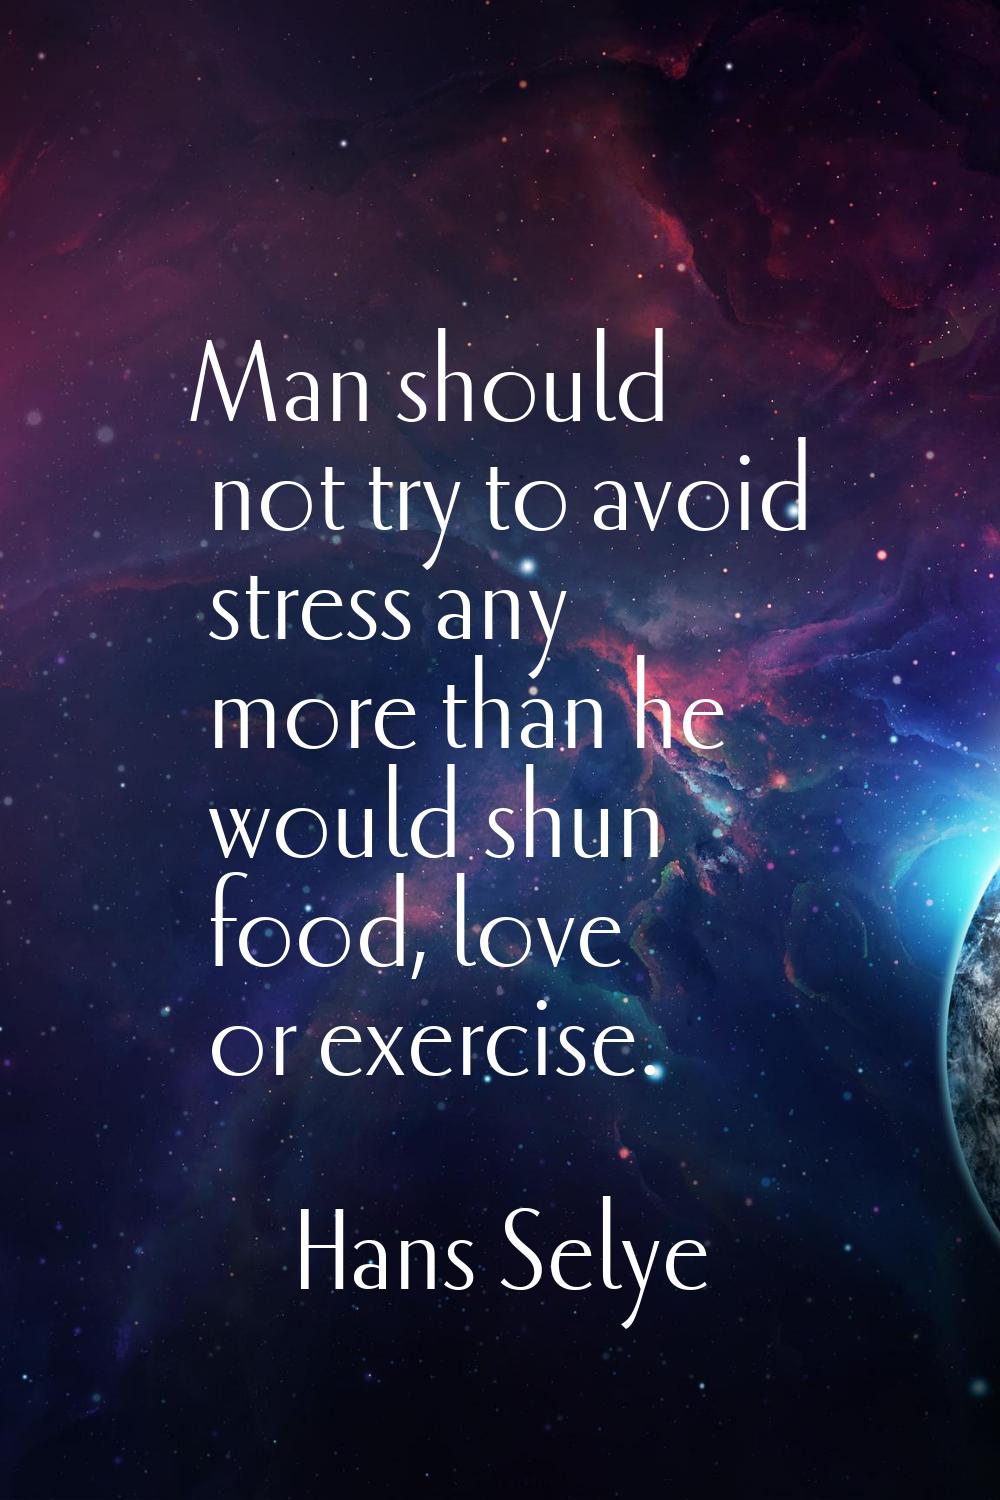 Man should not try to avoid stress any more than he would shun food, love or exercise.